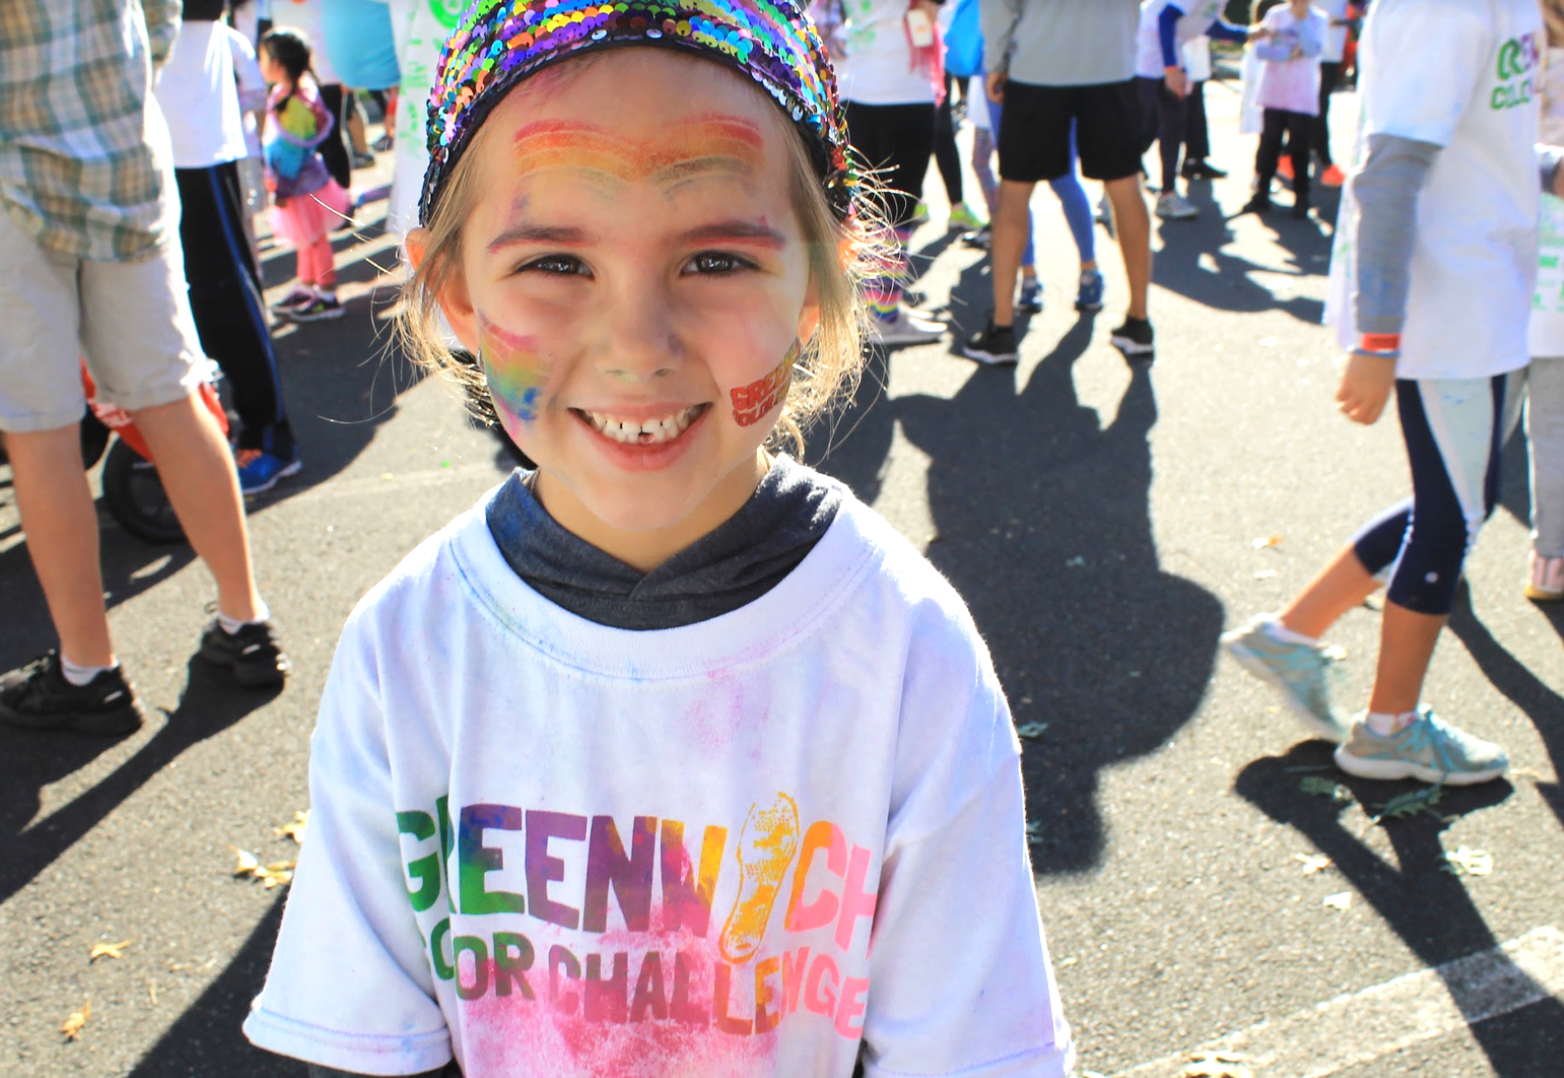 ISD's third annual Greenwich Color Challenge took place on Oct 6, 2019. Photo: Grace Usowski